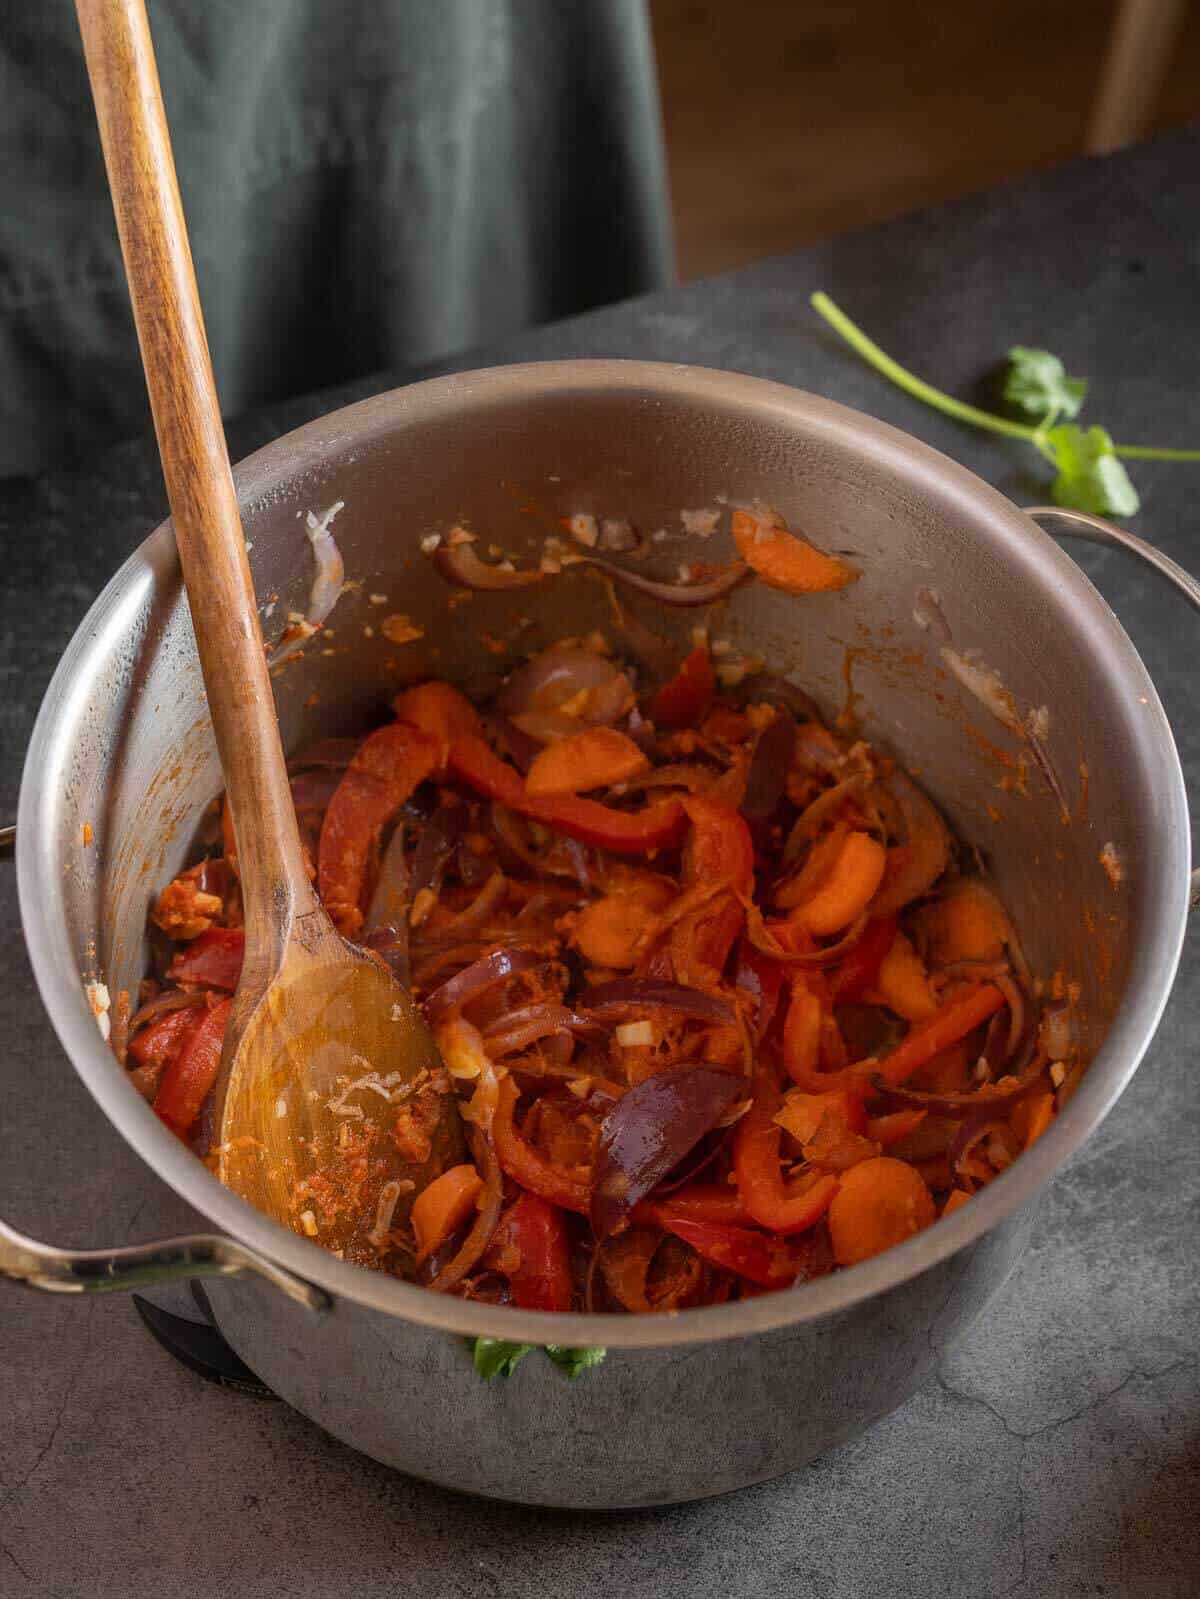 adding hard vegetables like carrots to the stir-fry.